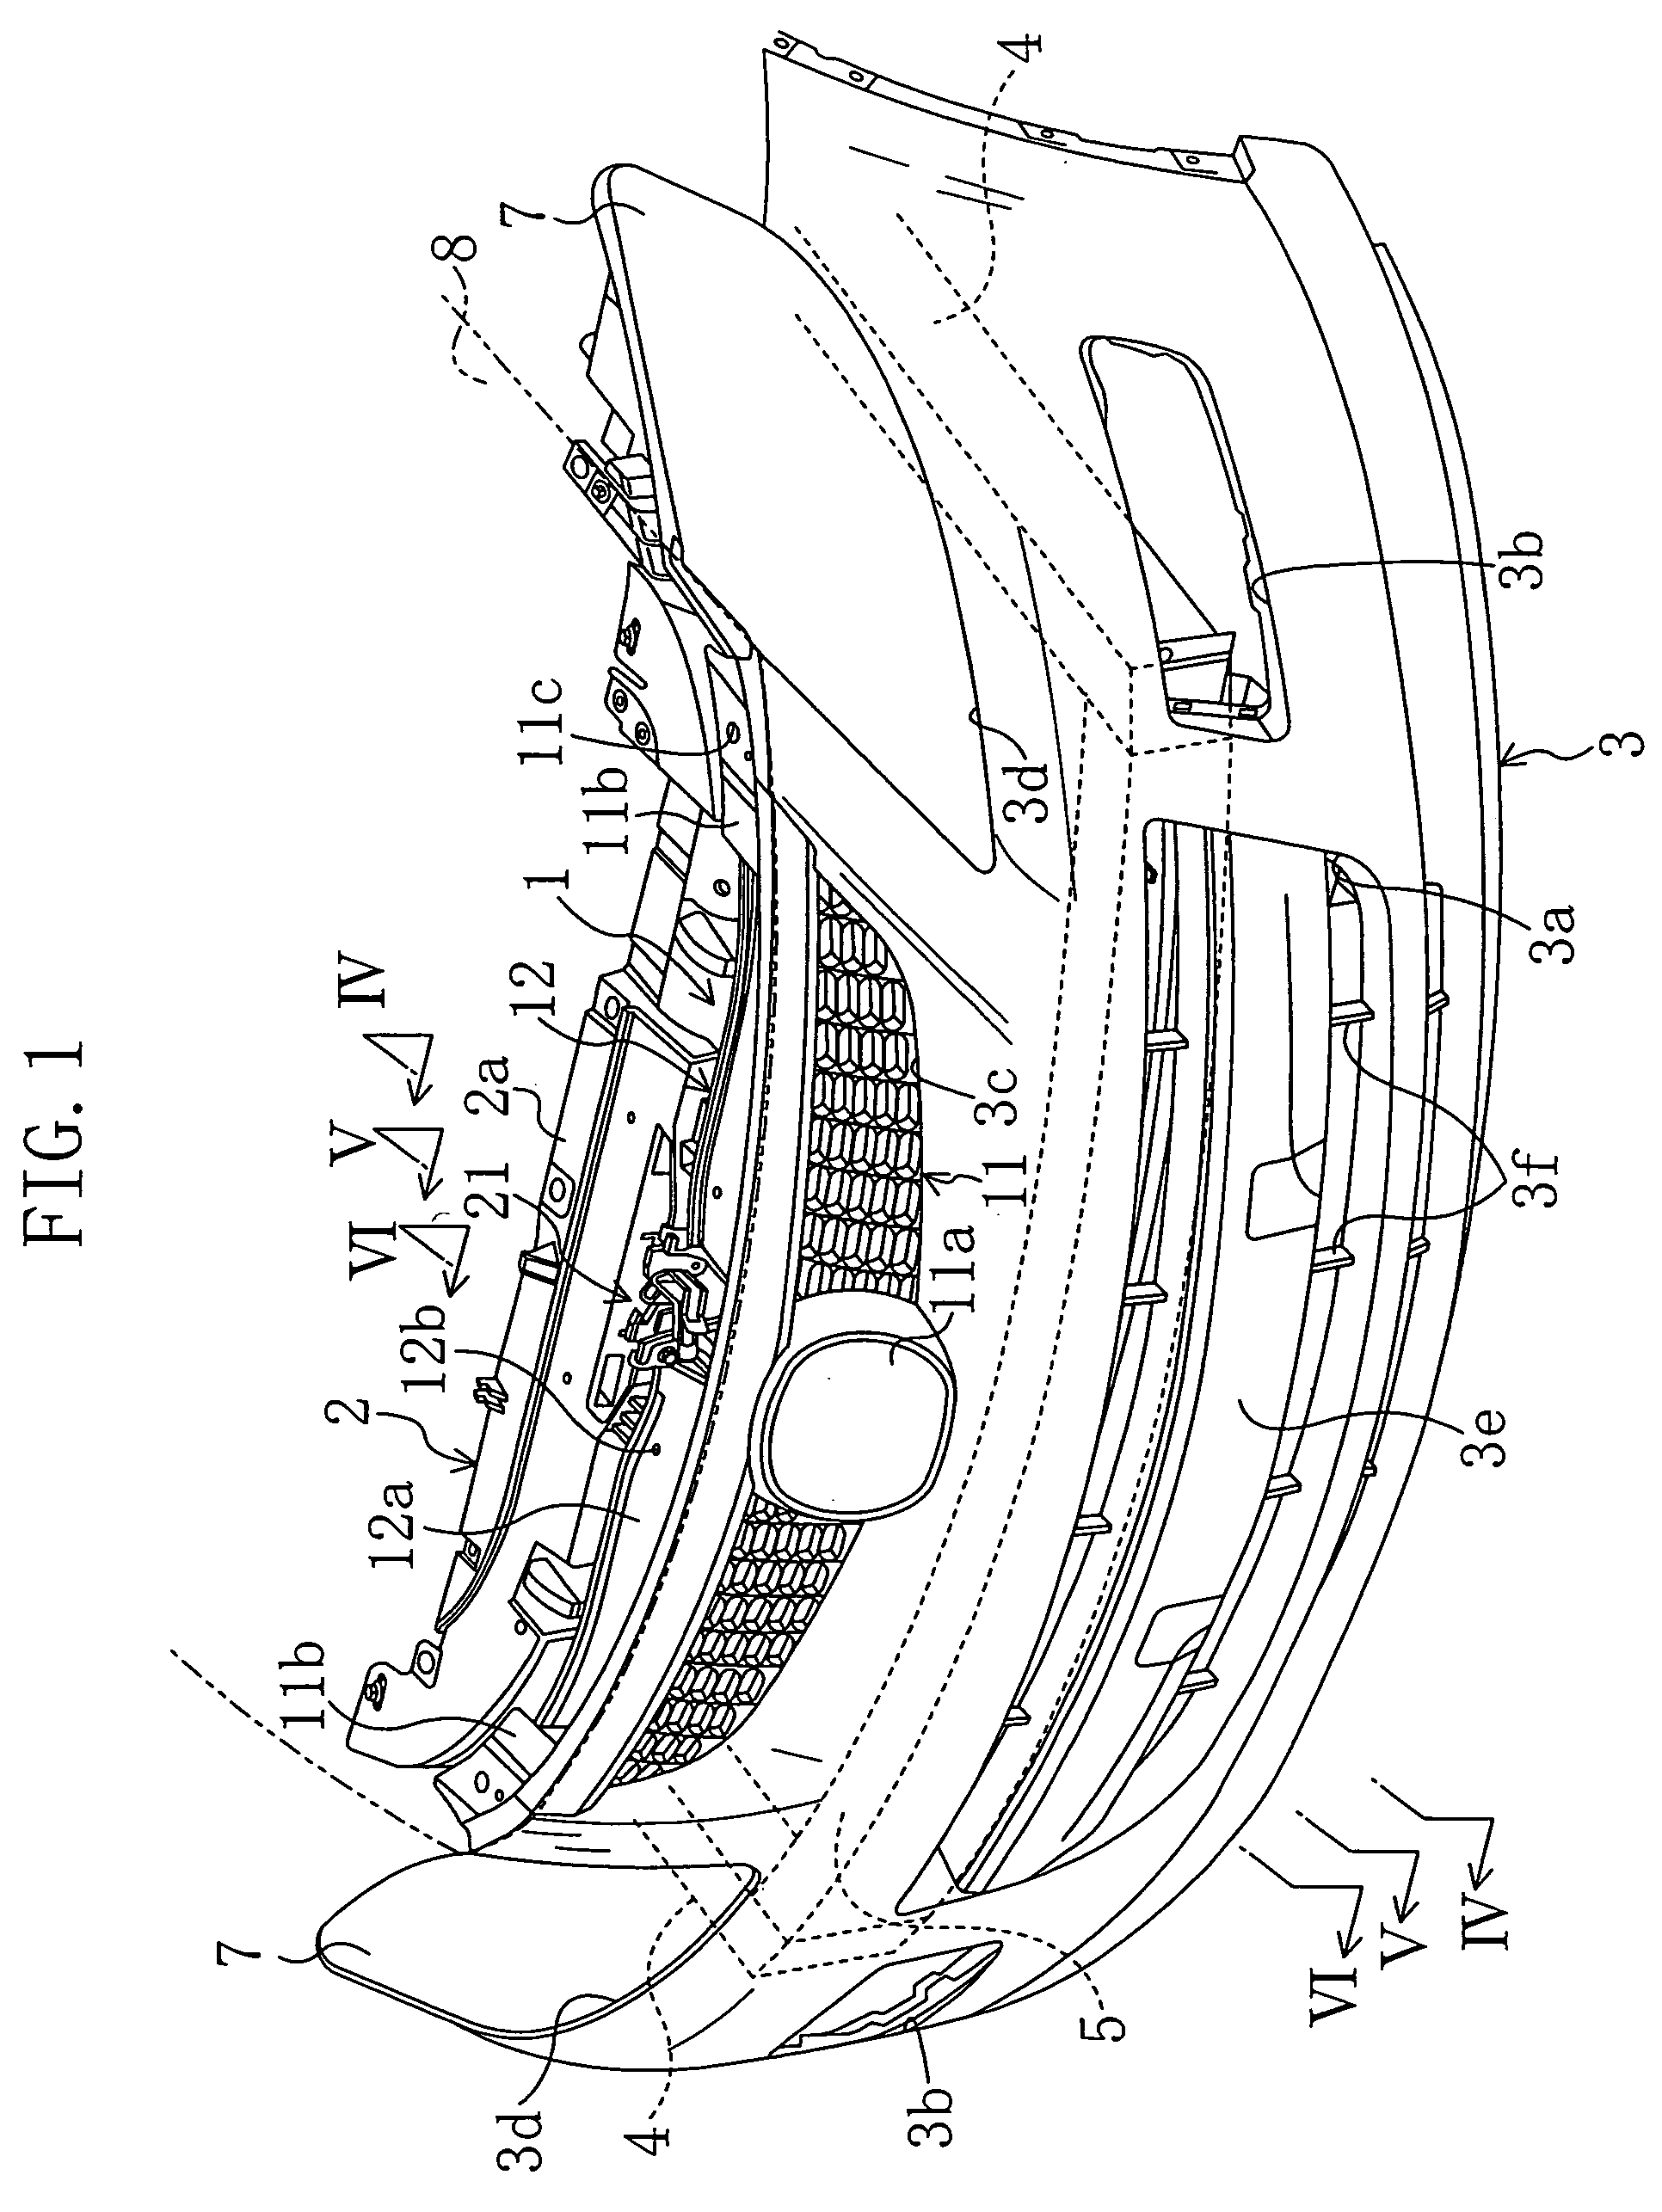 Vehicle front end structure